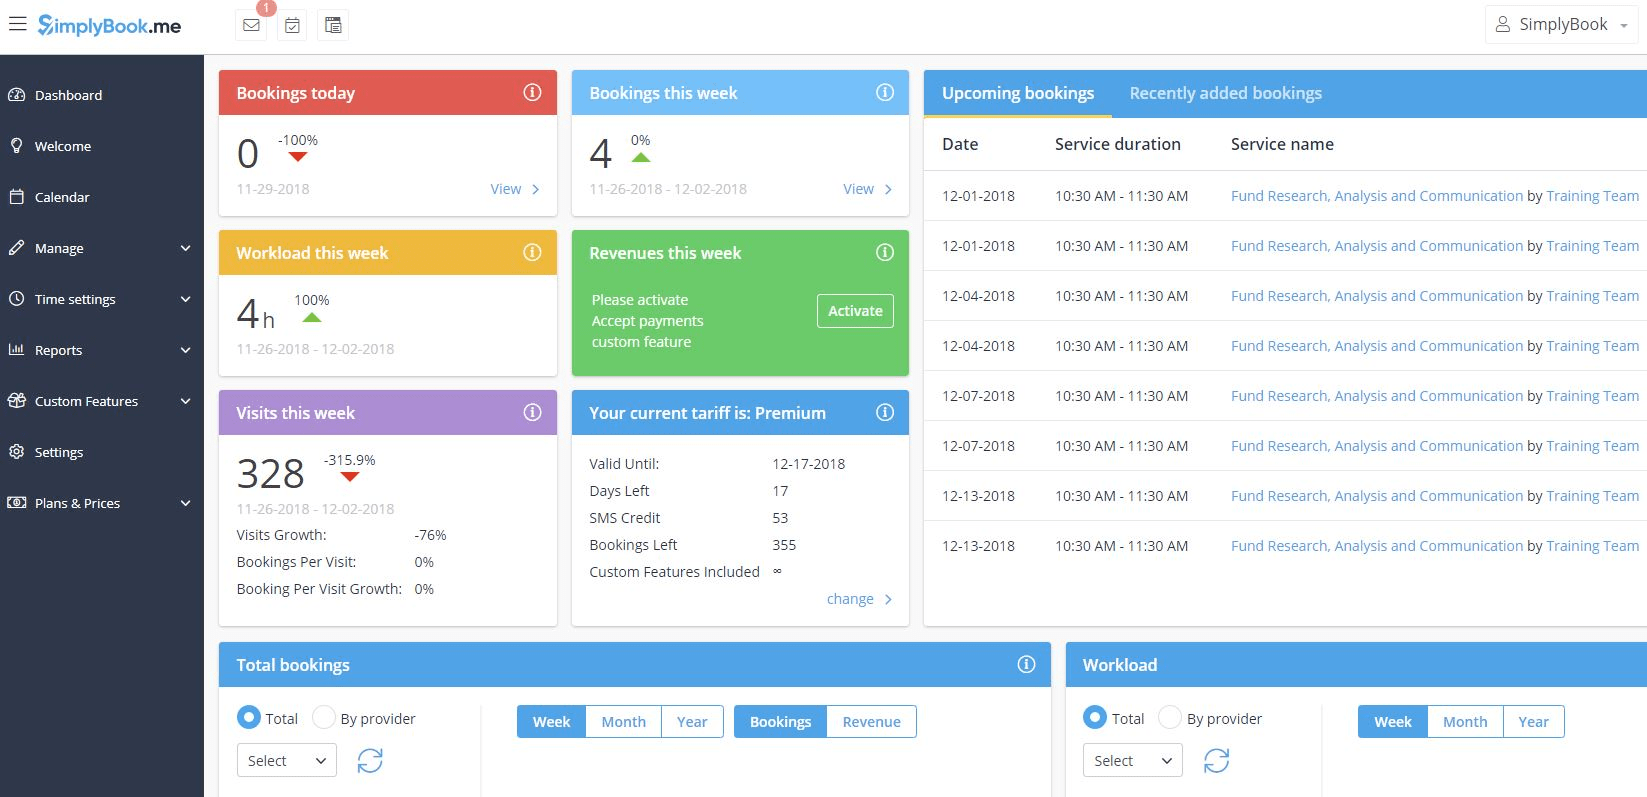 Dashboard of simplybook showing scheduled meetings